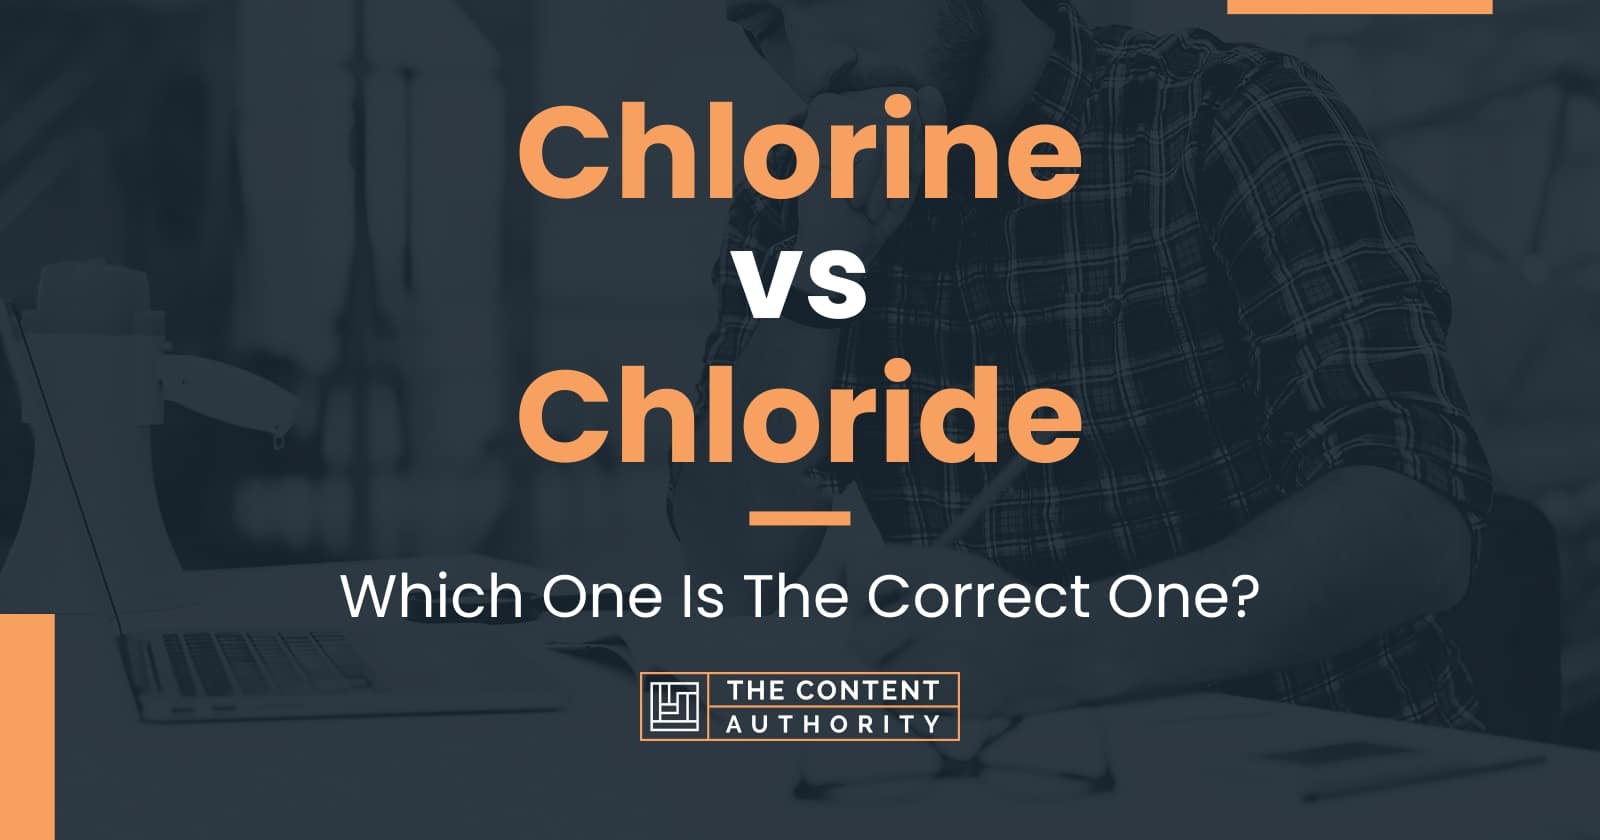 Chlorine vs Chloride Which One Is The Correct One?